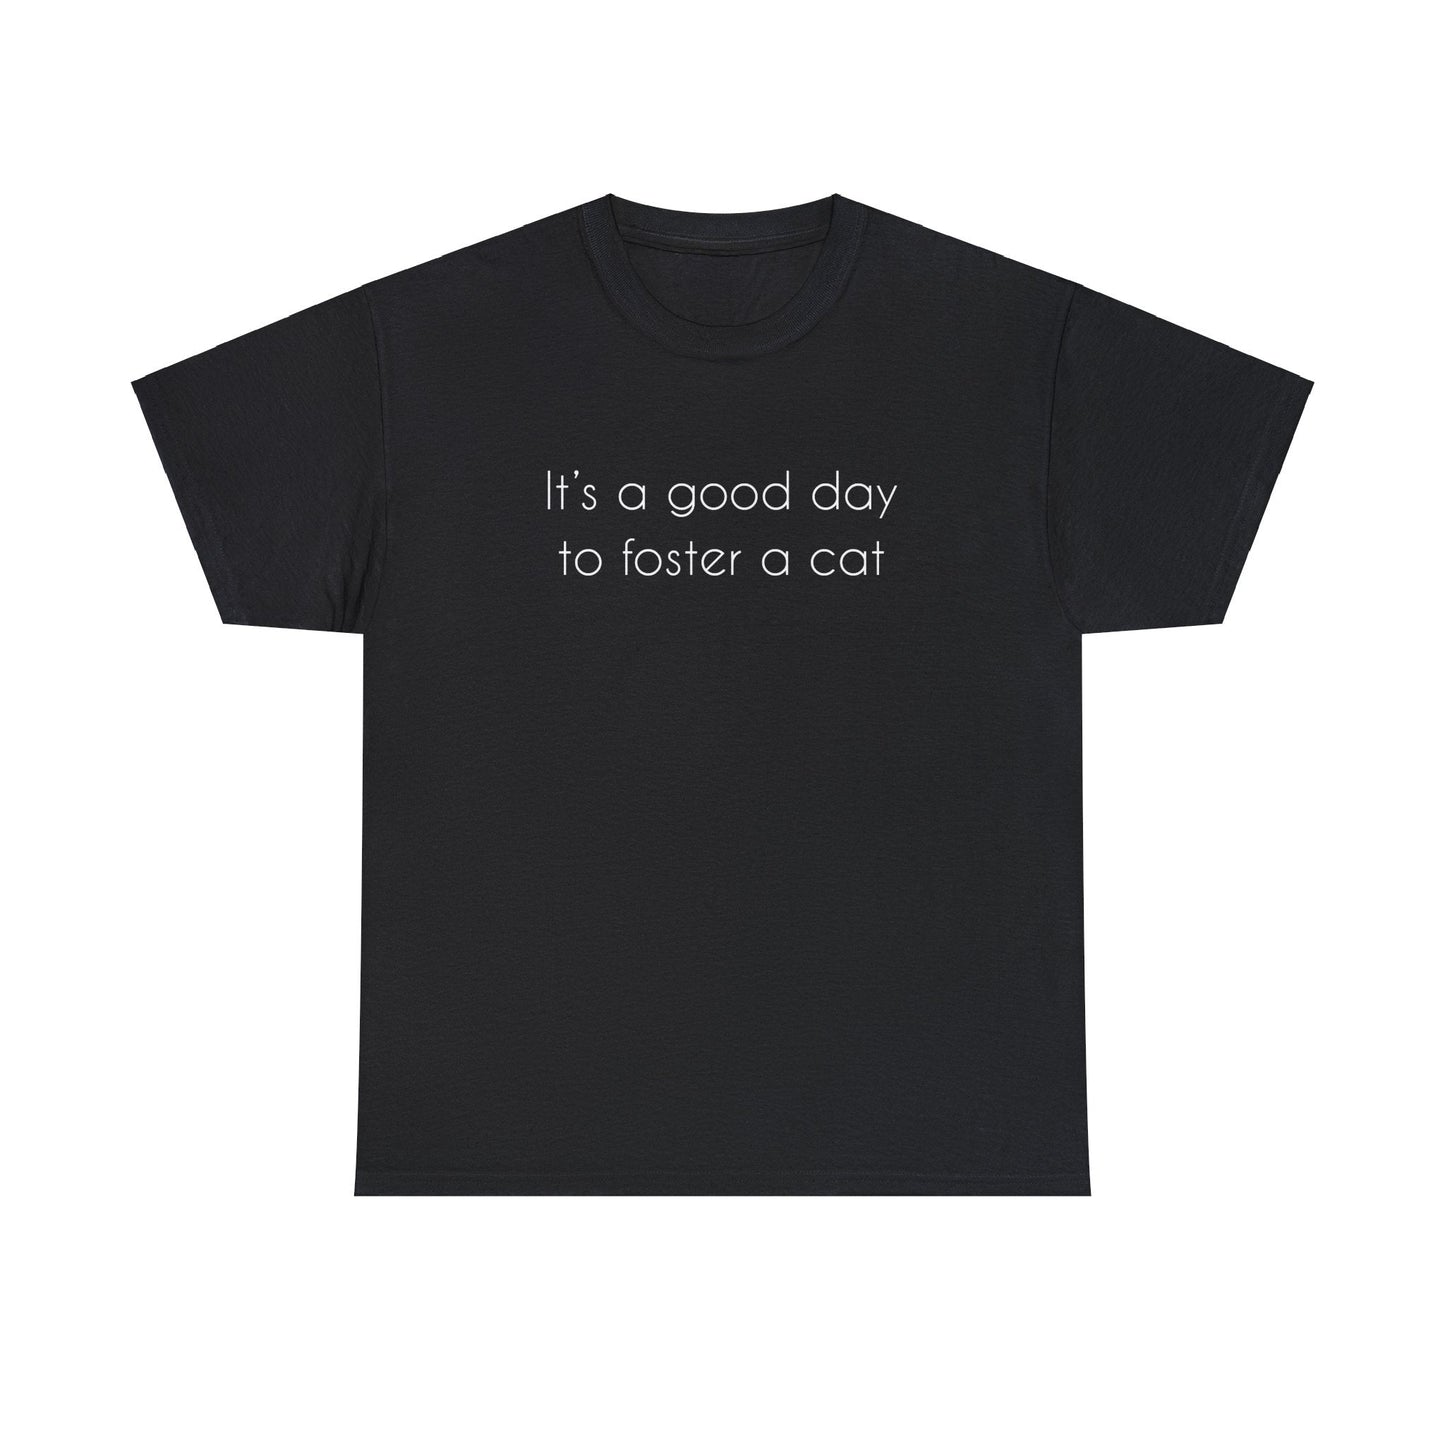 It's A Good Day To Foster A Cat | Text Tees - Detezi Designs-15636803837586010958